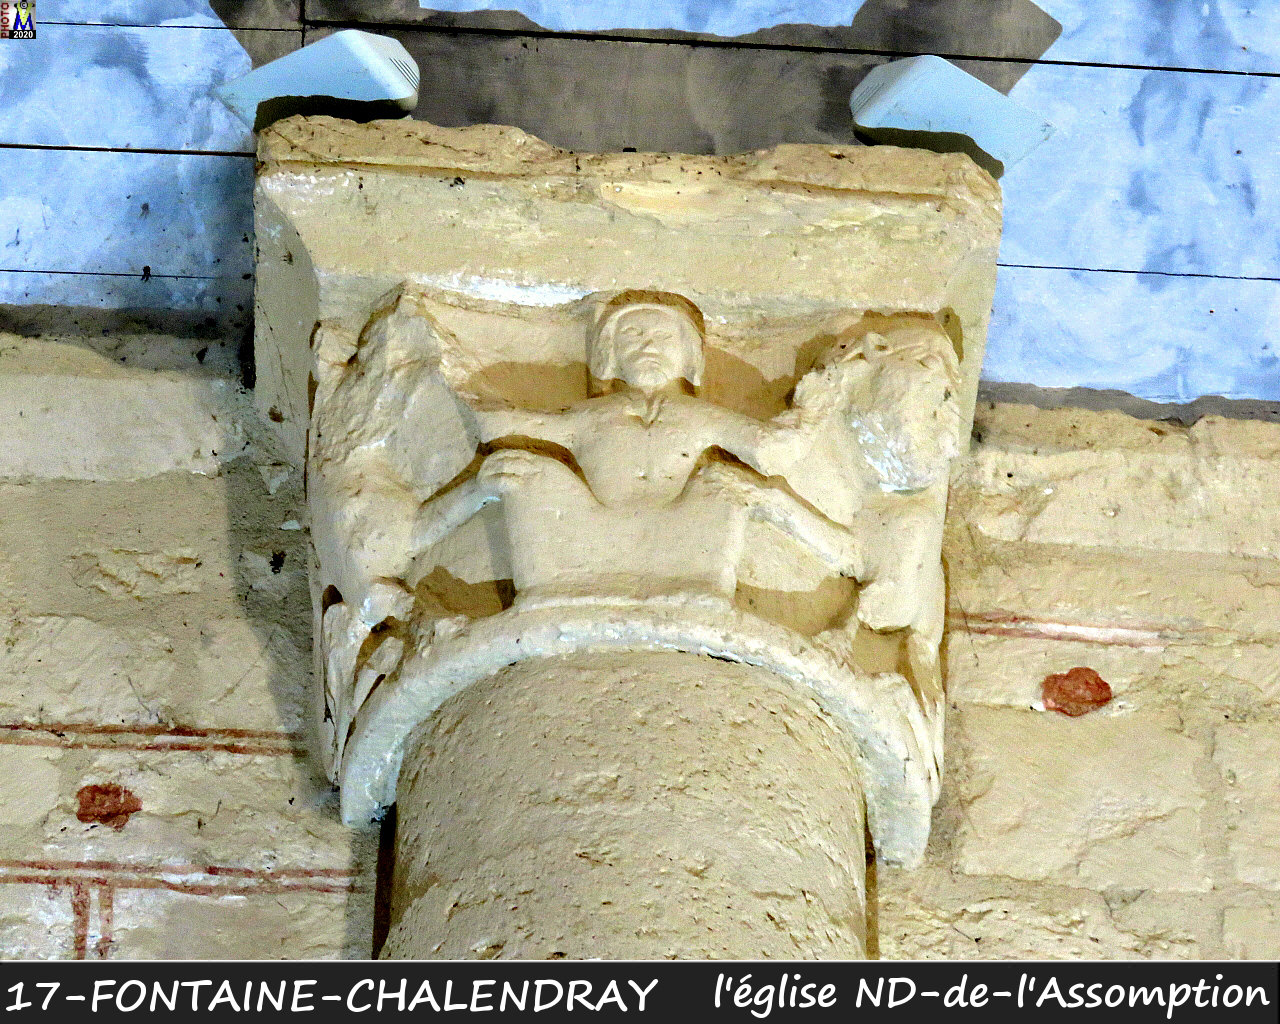 17FONTAINE-CHALENDRAY_eglise_1112.jpg